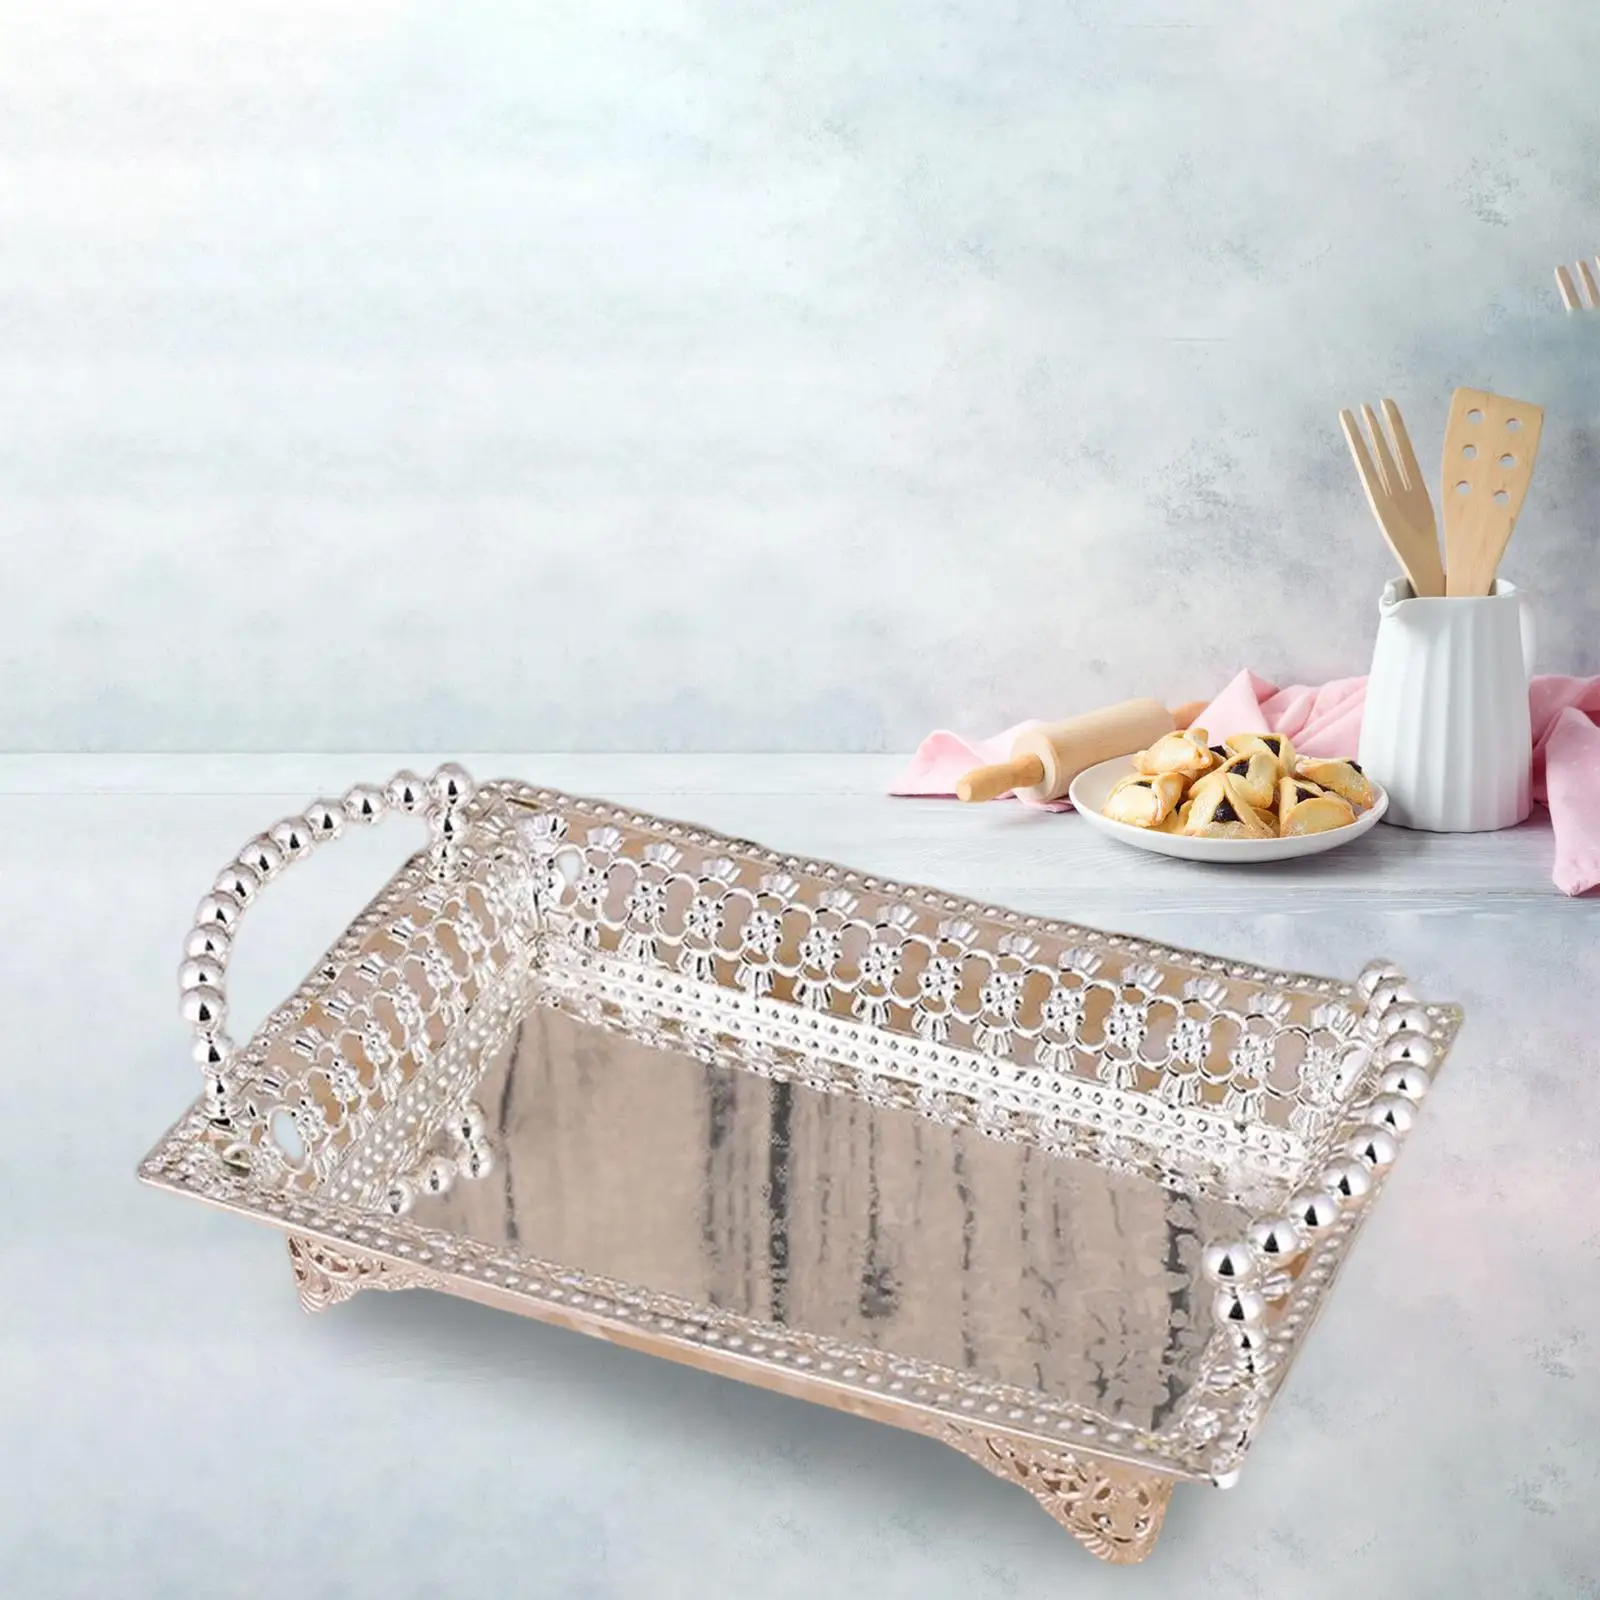 European Style Serving Tray Dinner Plate Dessert Cake Serving Tray for Wedding Table Decor Tea Party Countertop